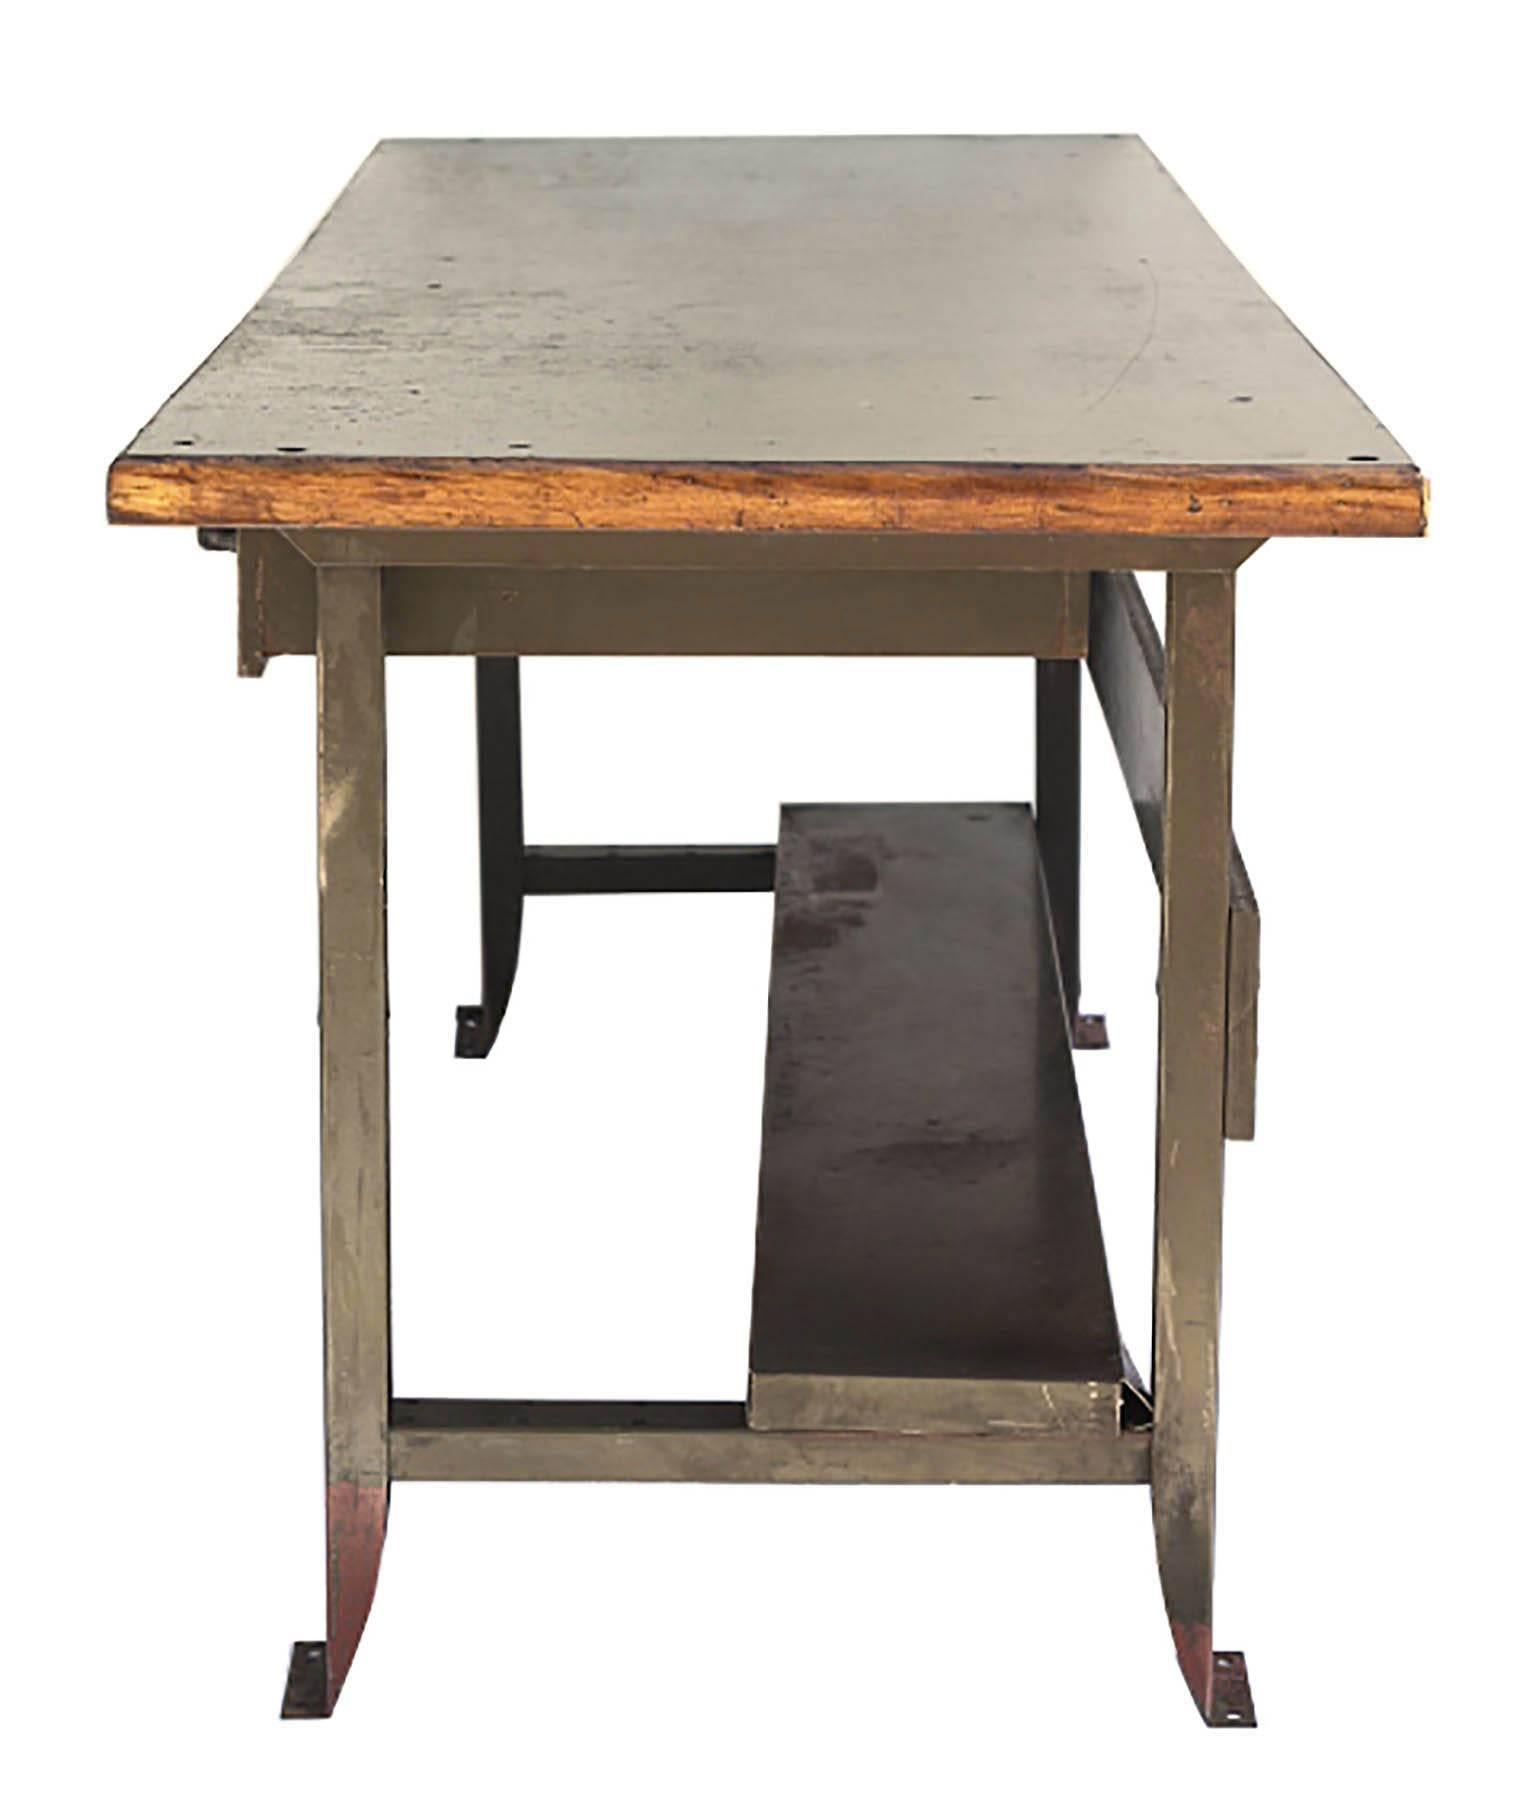 Industrial table on steel base with two original steel pullout drawers, original machine shop refinished wood top with oak banding. This table was made in San Francisco in the 1930s.